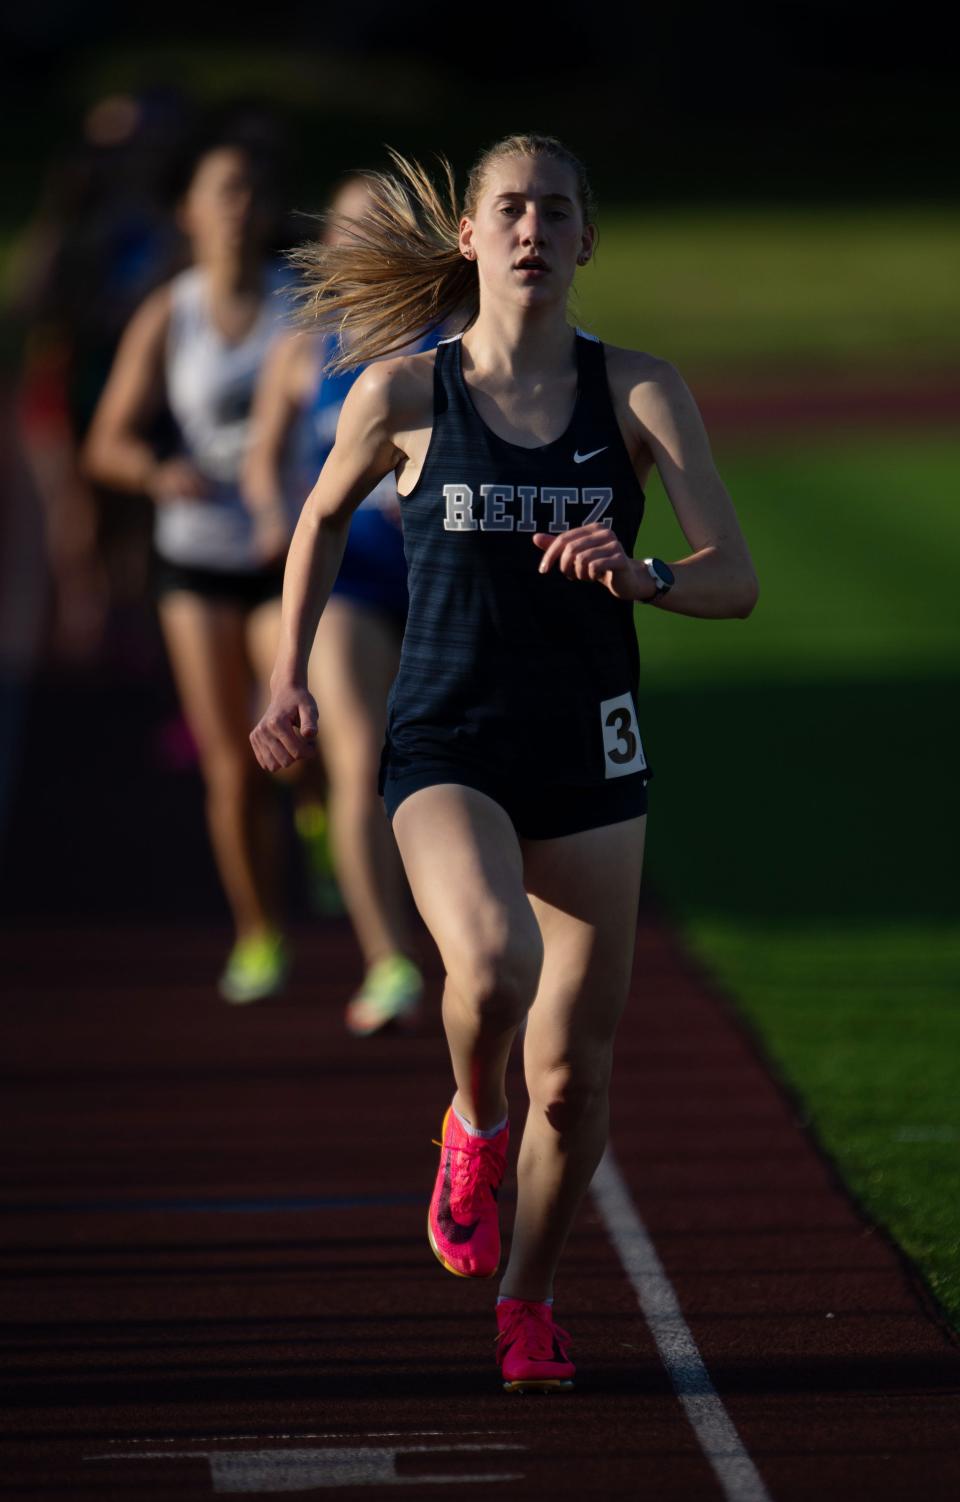 Reitz's Cordelia Hoover takes an early lead and eventually the win in the 1600 meter run with a time of 5:20.43 seconds at the 2023 Boys & Girls City Track & Field Meet at Central High School Monday evening, April 24, 2023.